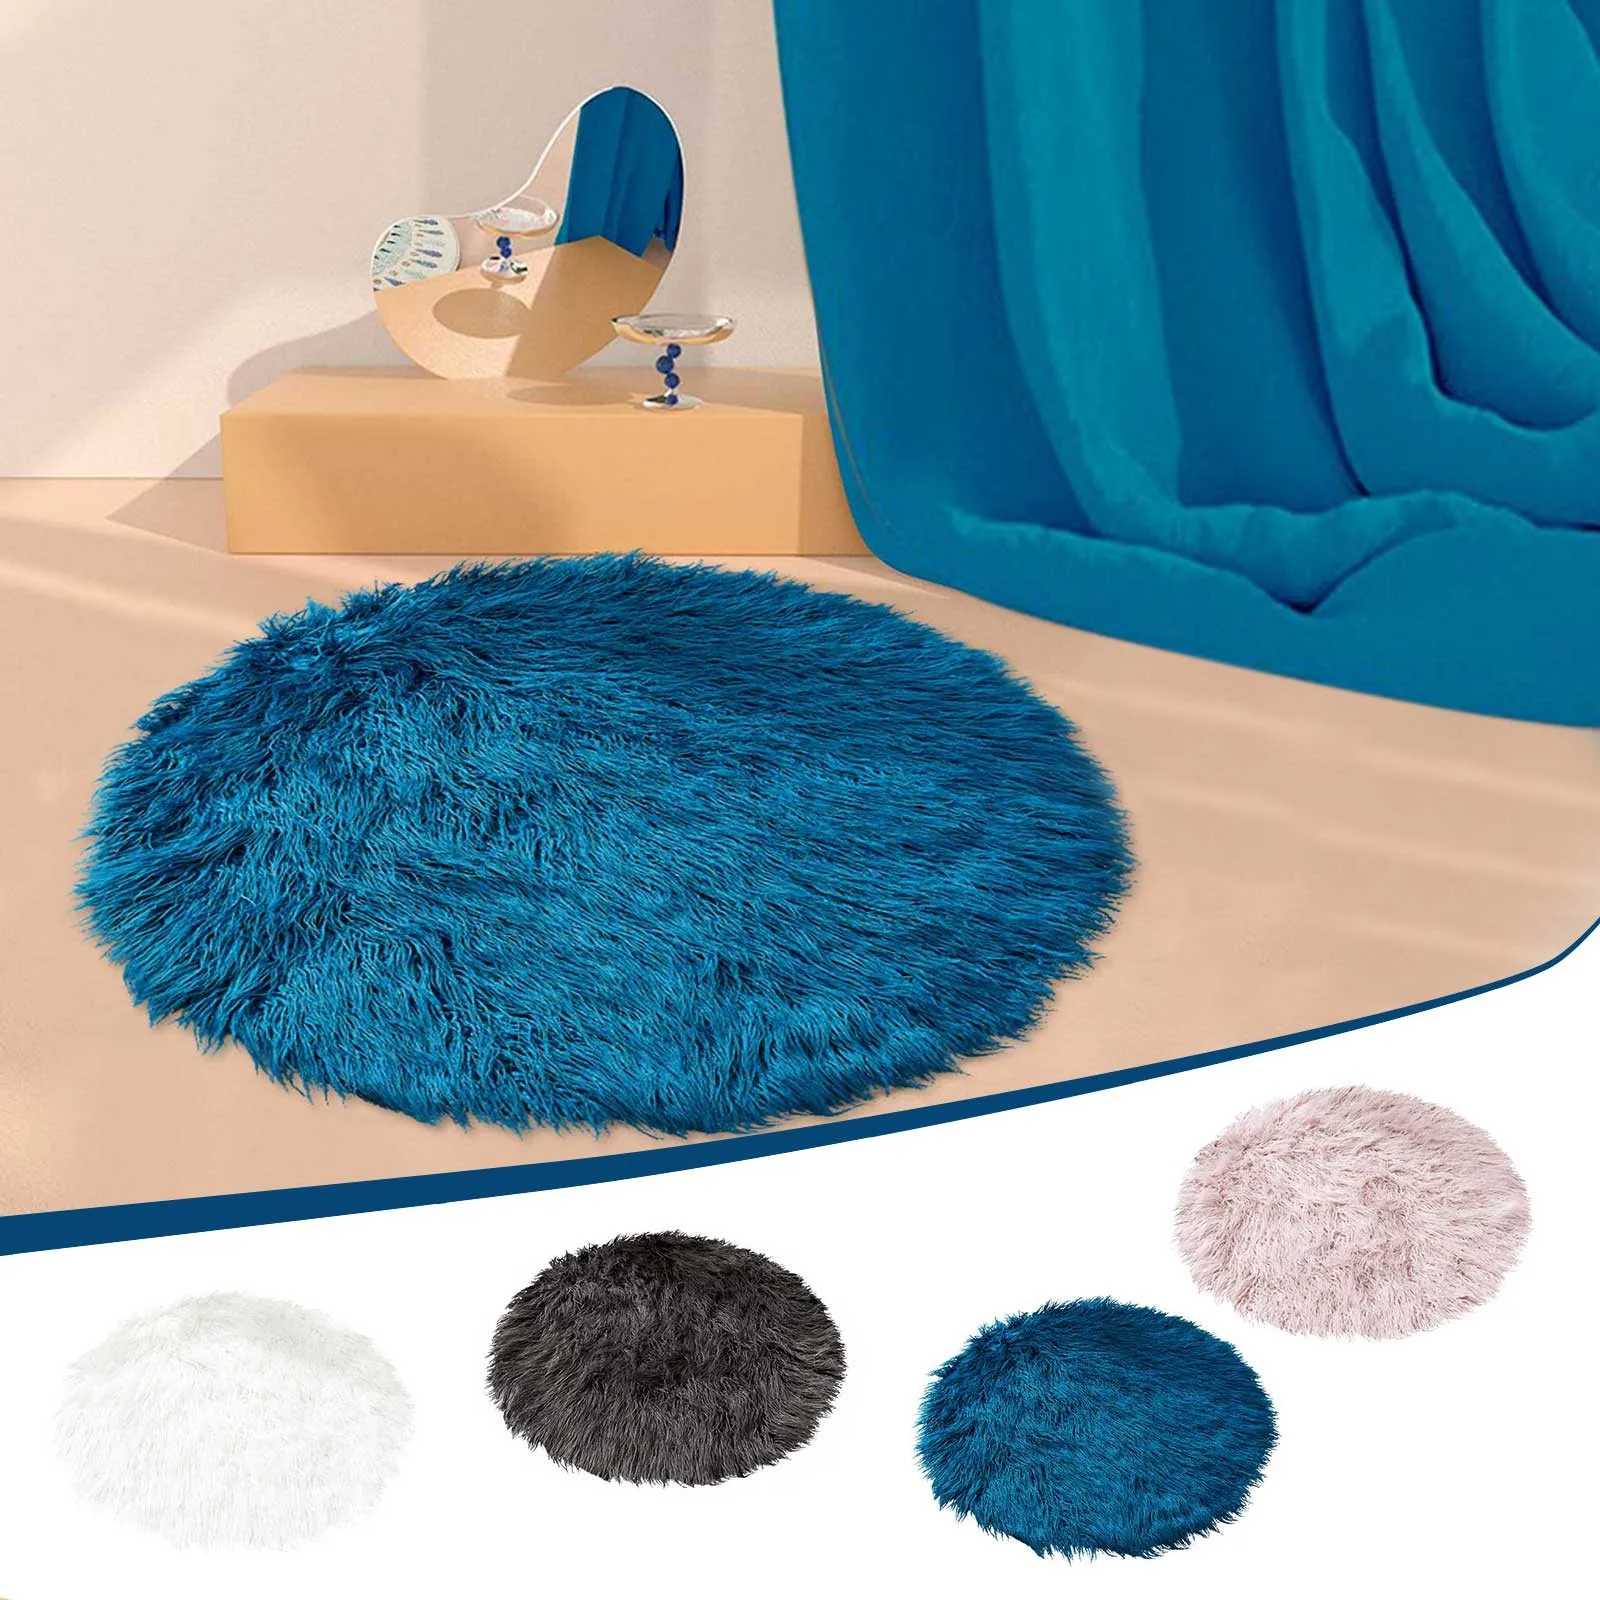 

Round Soft Faux Sheepskin Fur Area Rugs for Bedroom Living Room Floor Mat Shaggy Silky Plush Carpet Faux Fur Rug Bedside Rugs